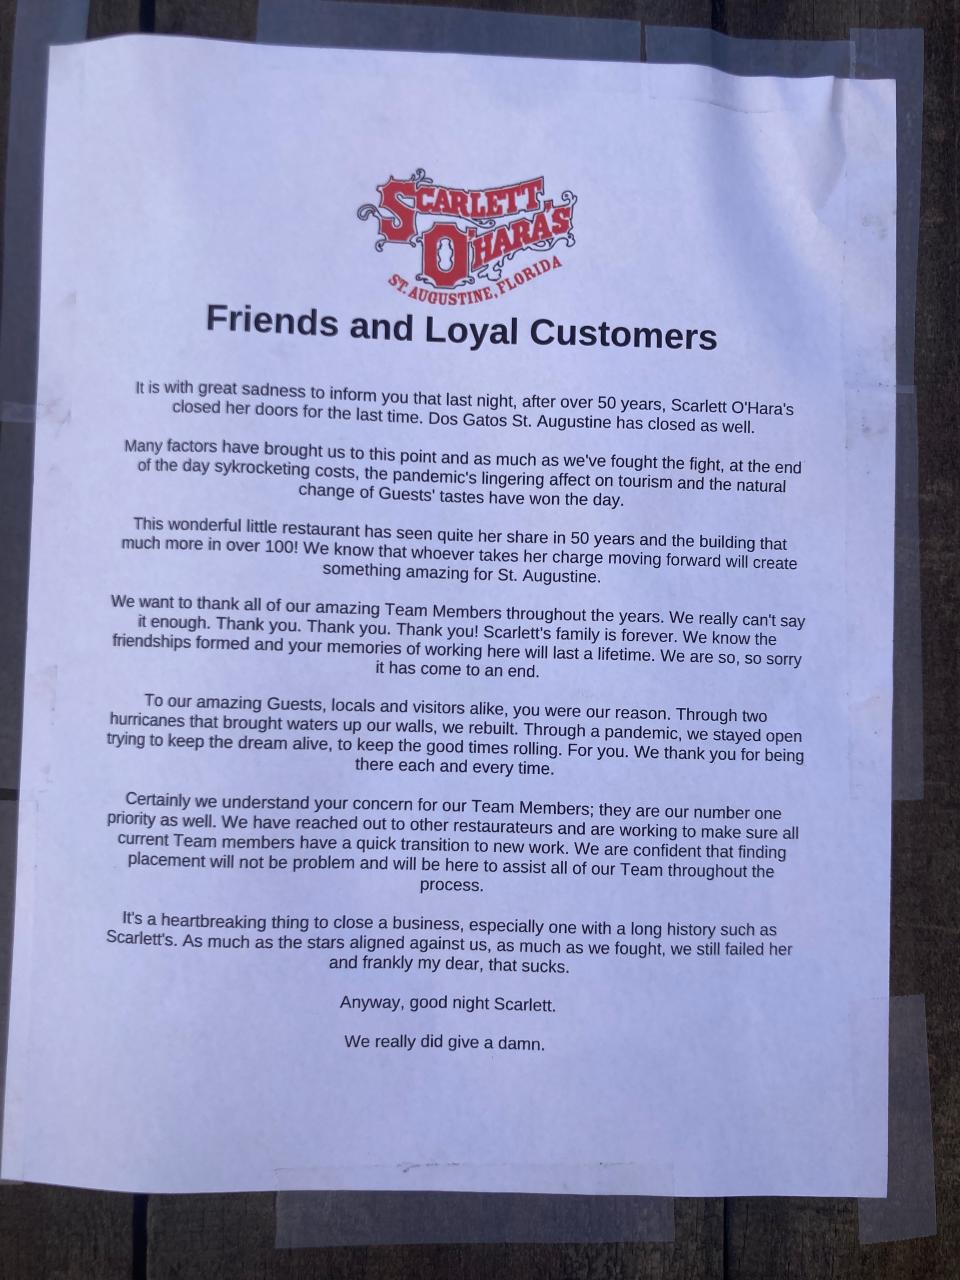 This letter was posted at Scarlett O'Hara's and Dos Gatos as of Tuesday.